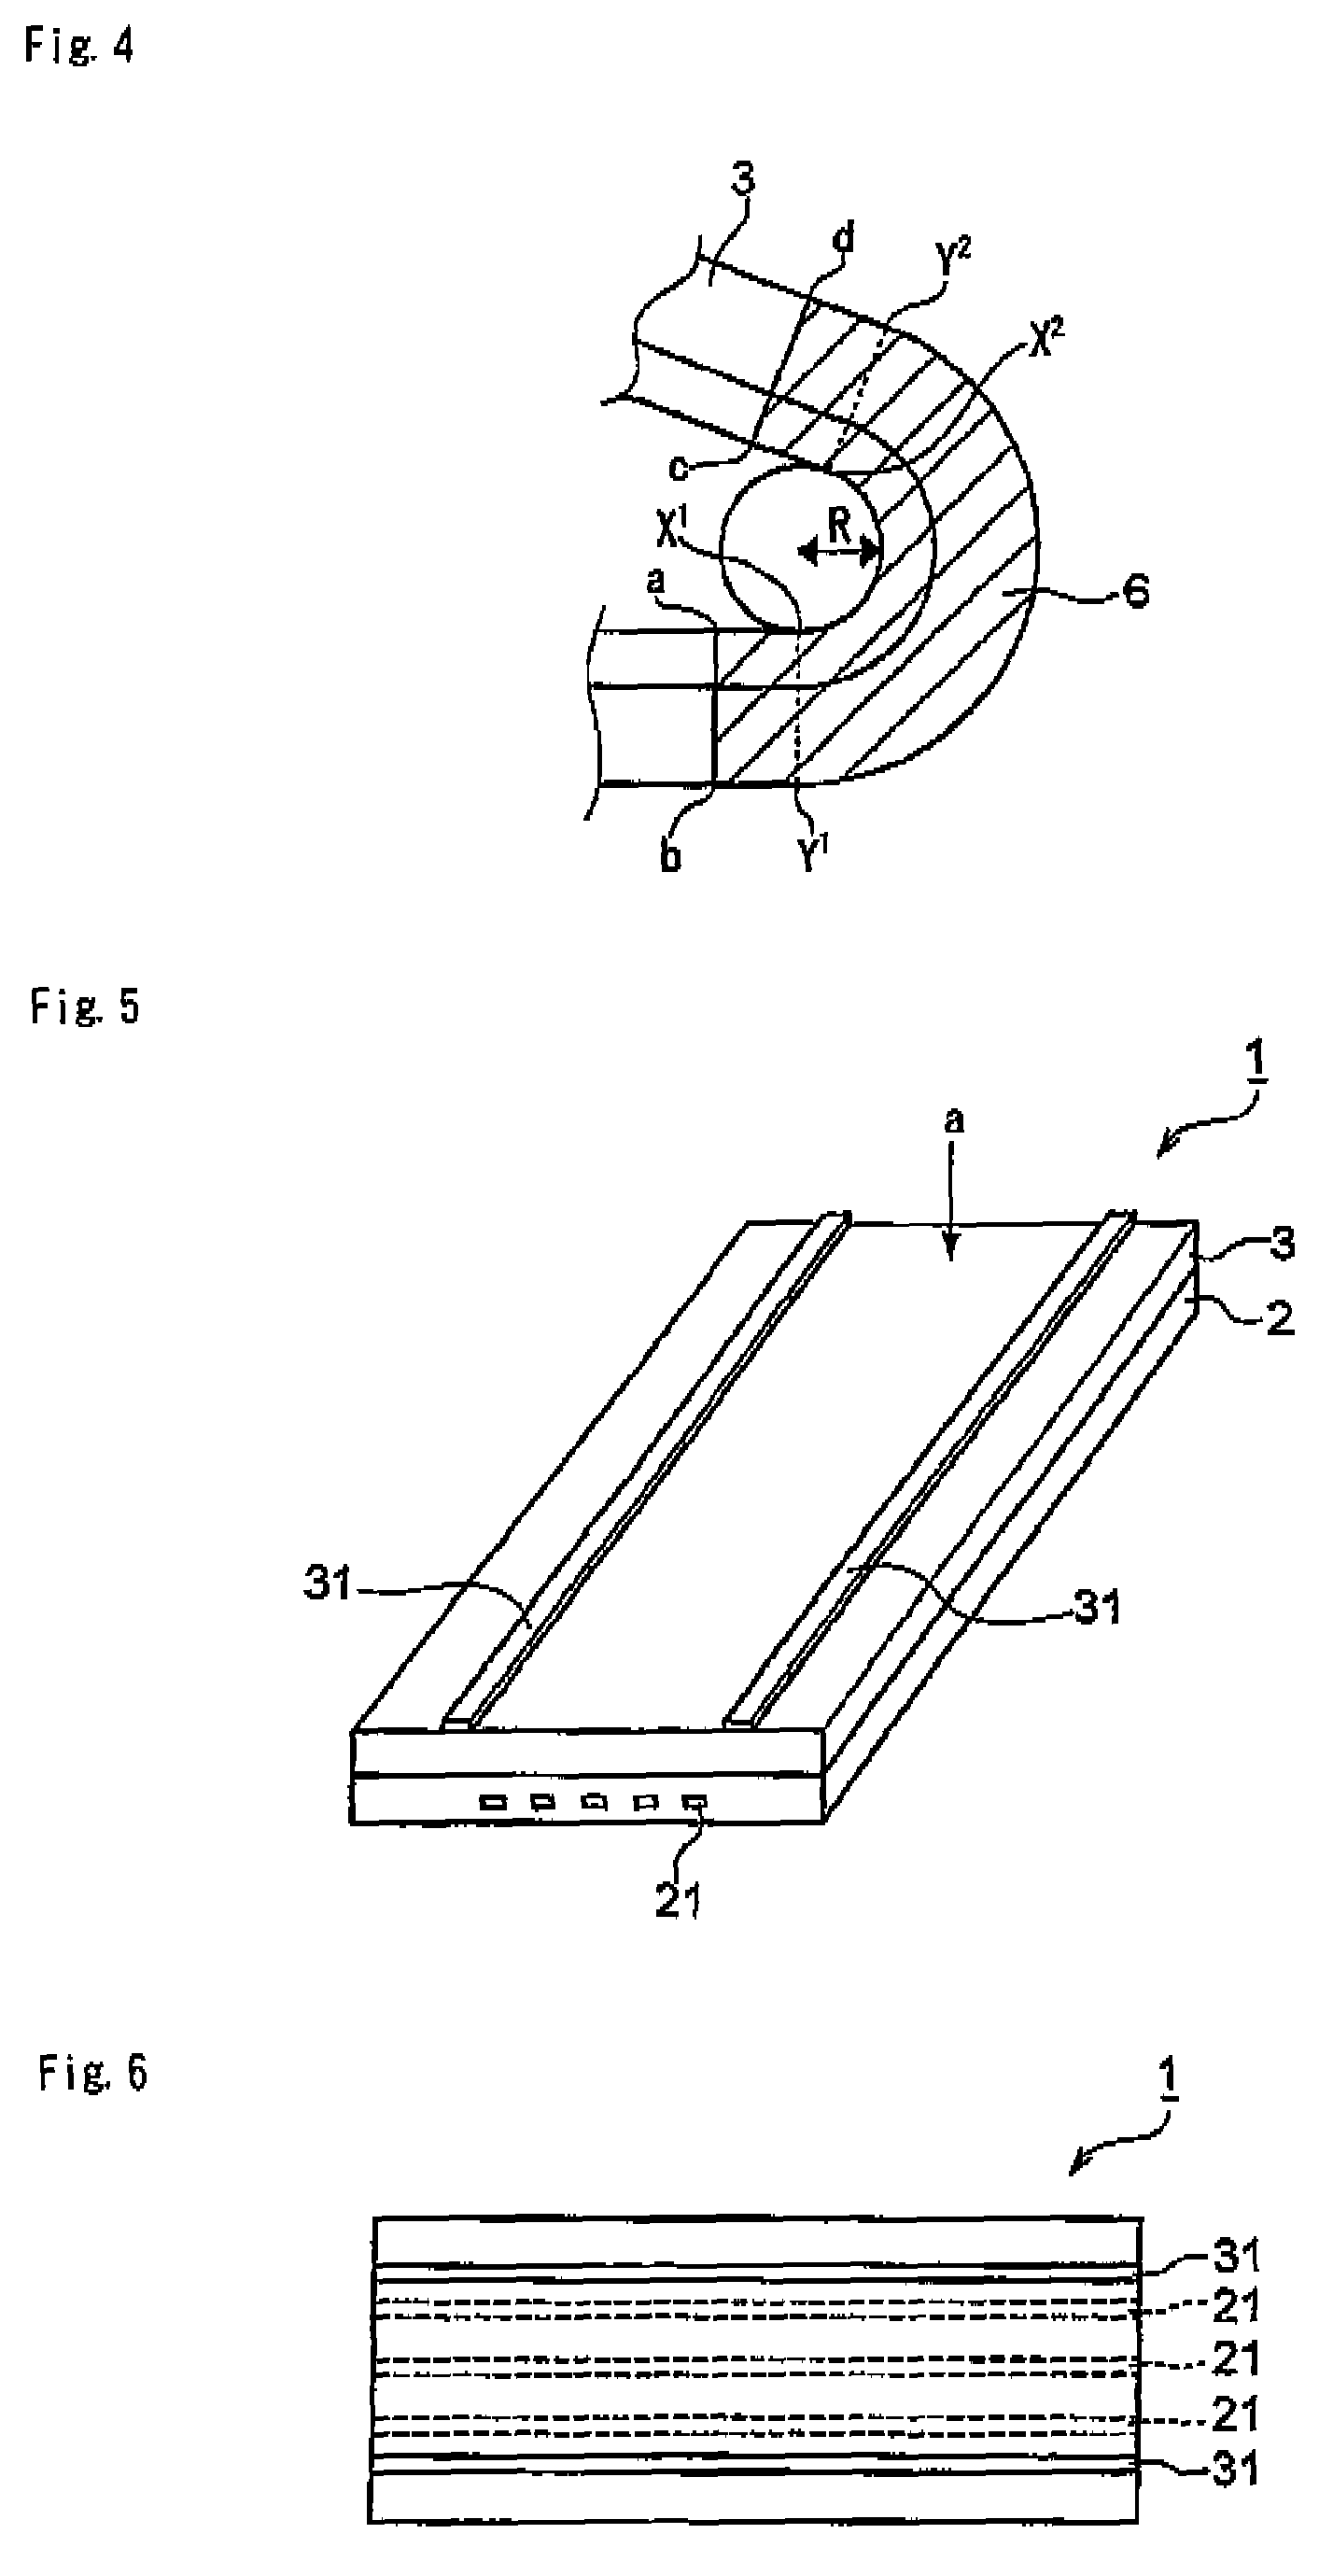 Opto-electric combined circuit board and electronic devices